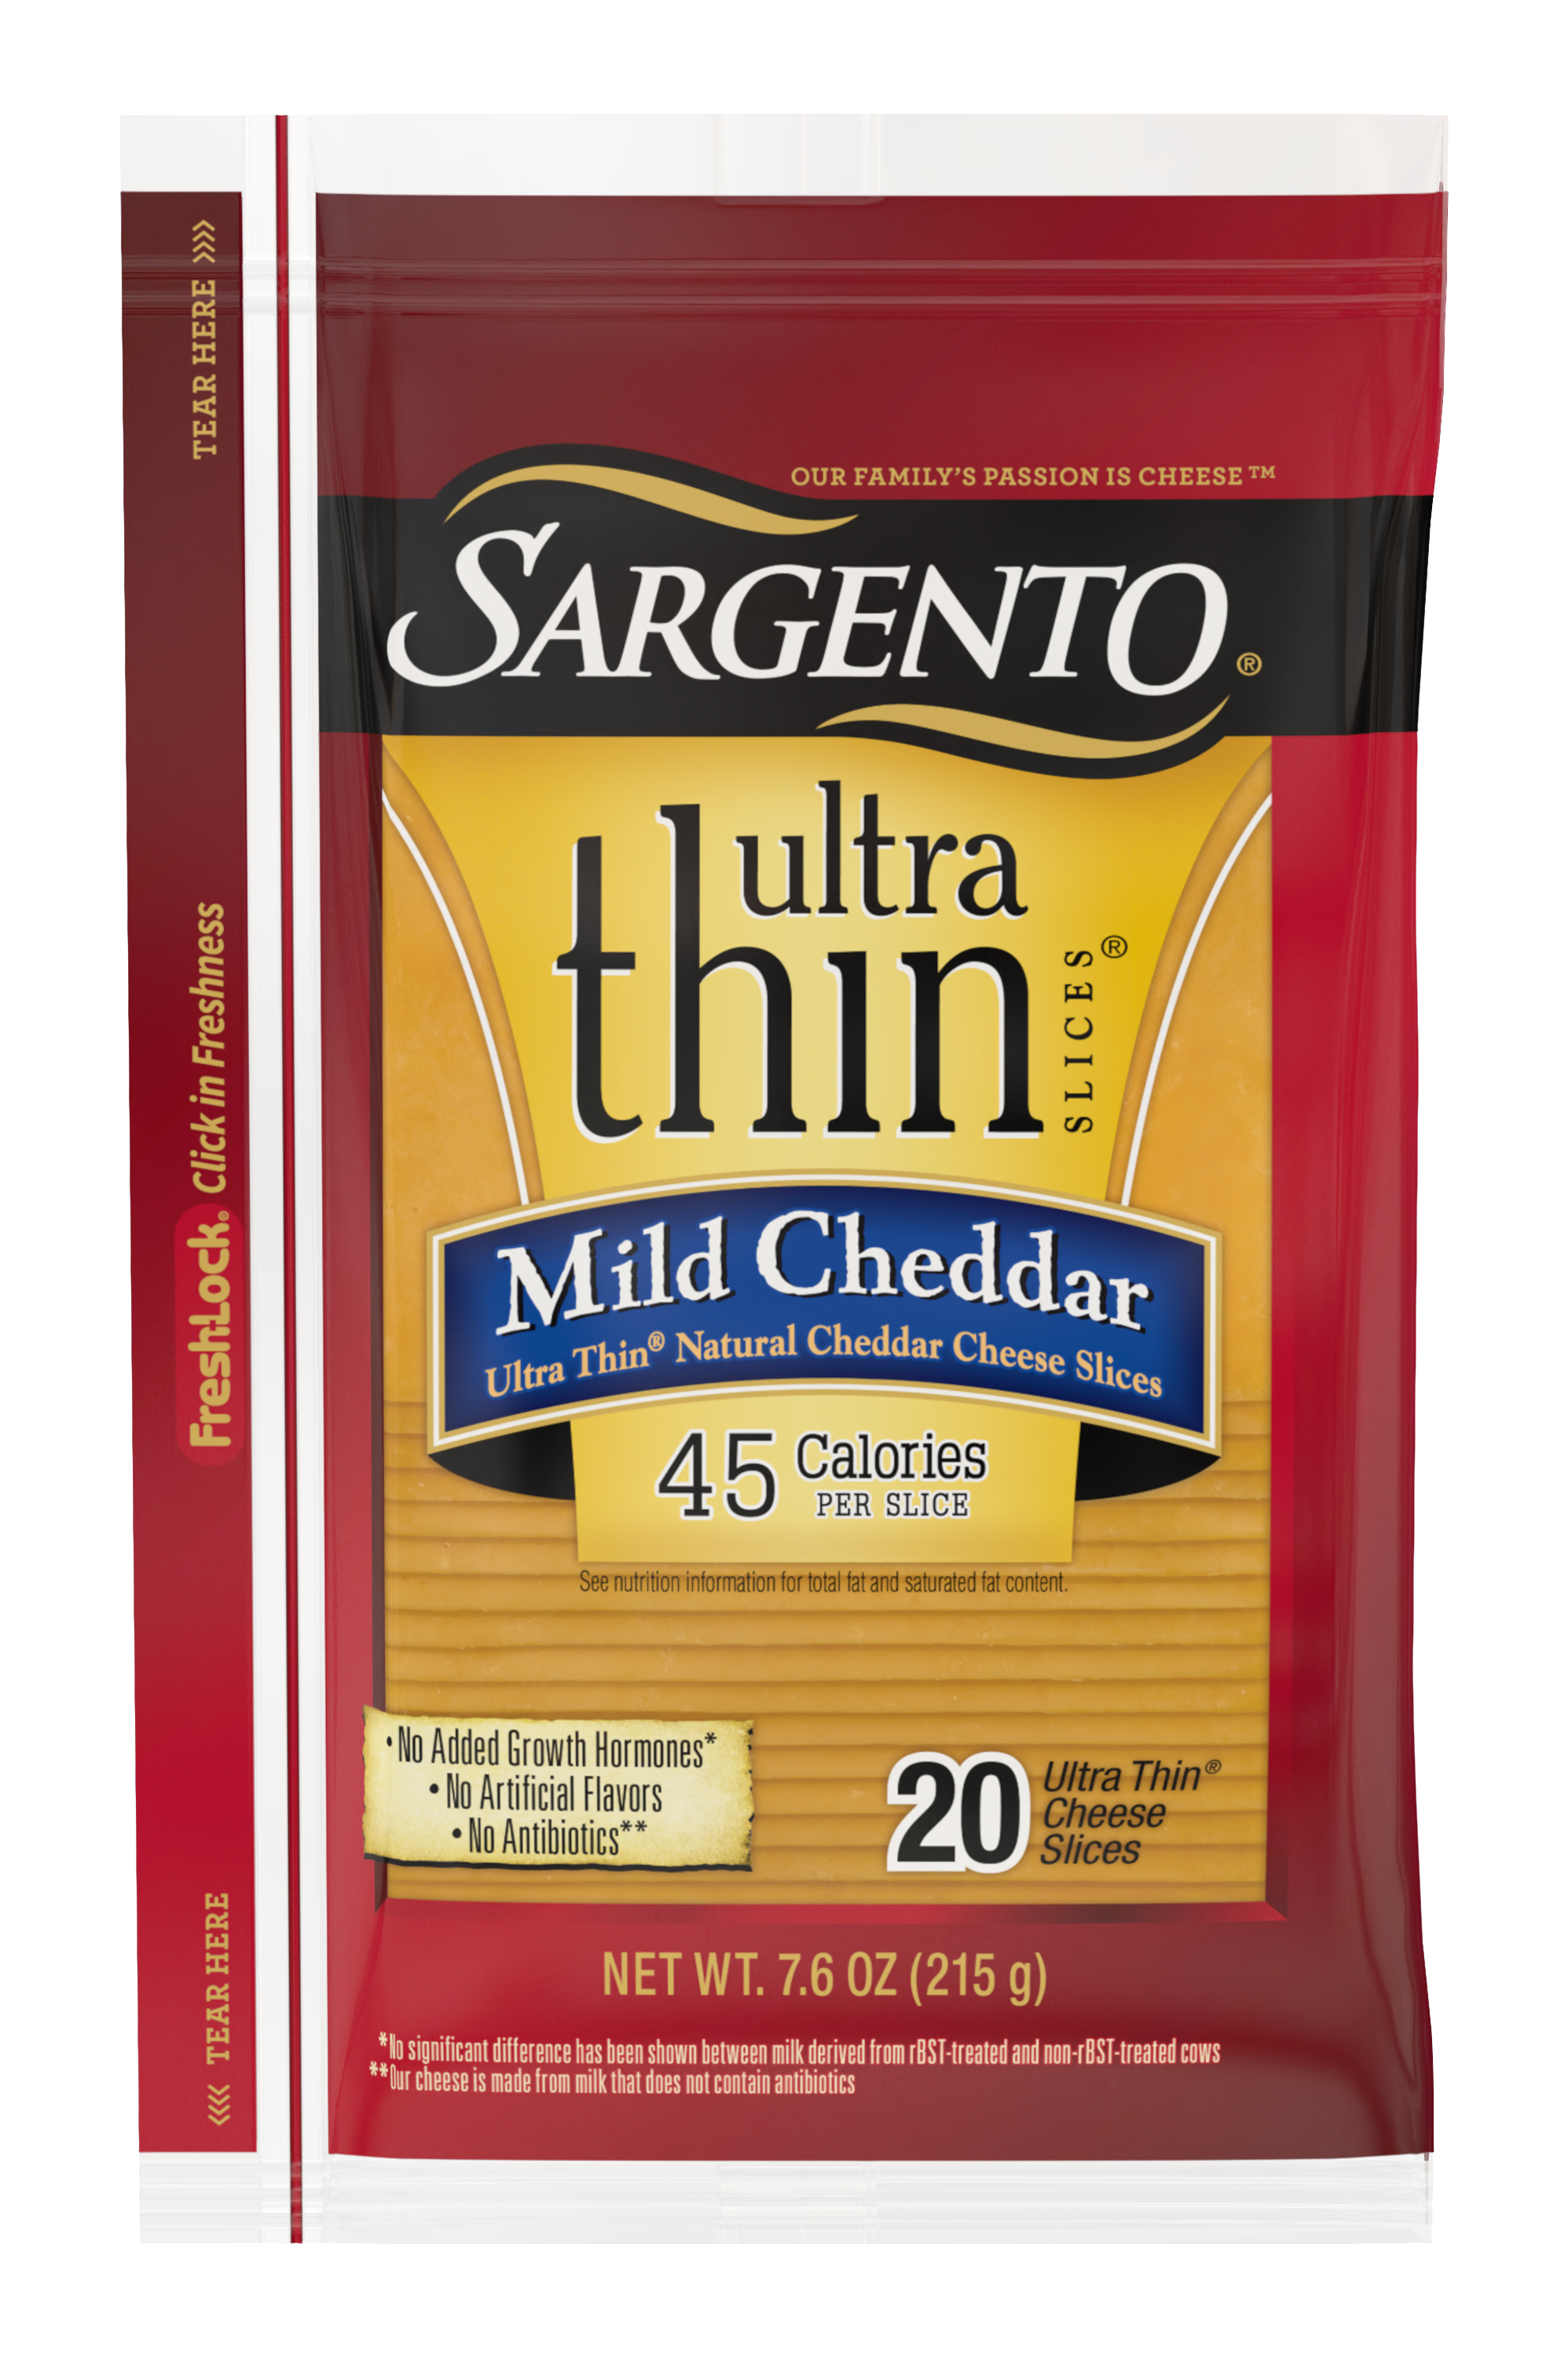 Sargento® Mild Natural Cheddar Cheese Ultra Thin® Slices